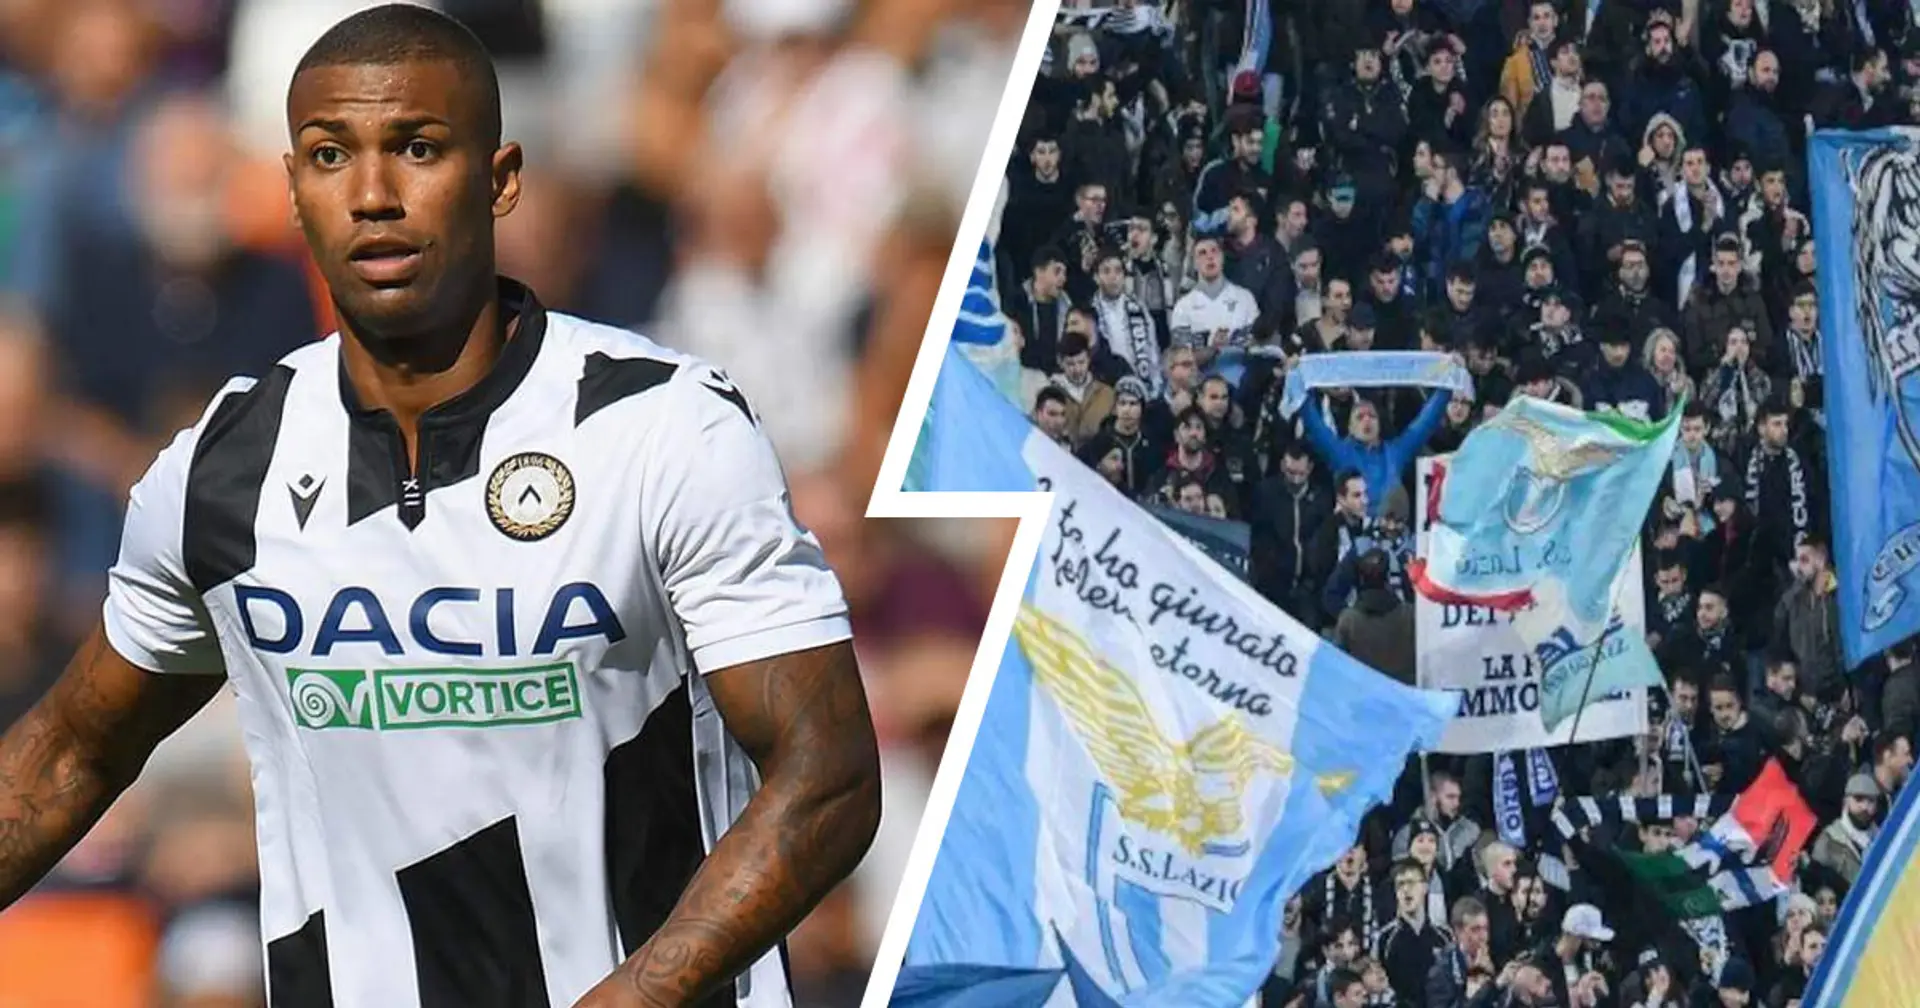 Udinese midfielder Wallace reportedly subject to monkey chants against Lazio